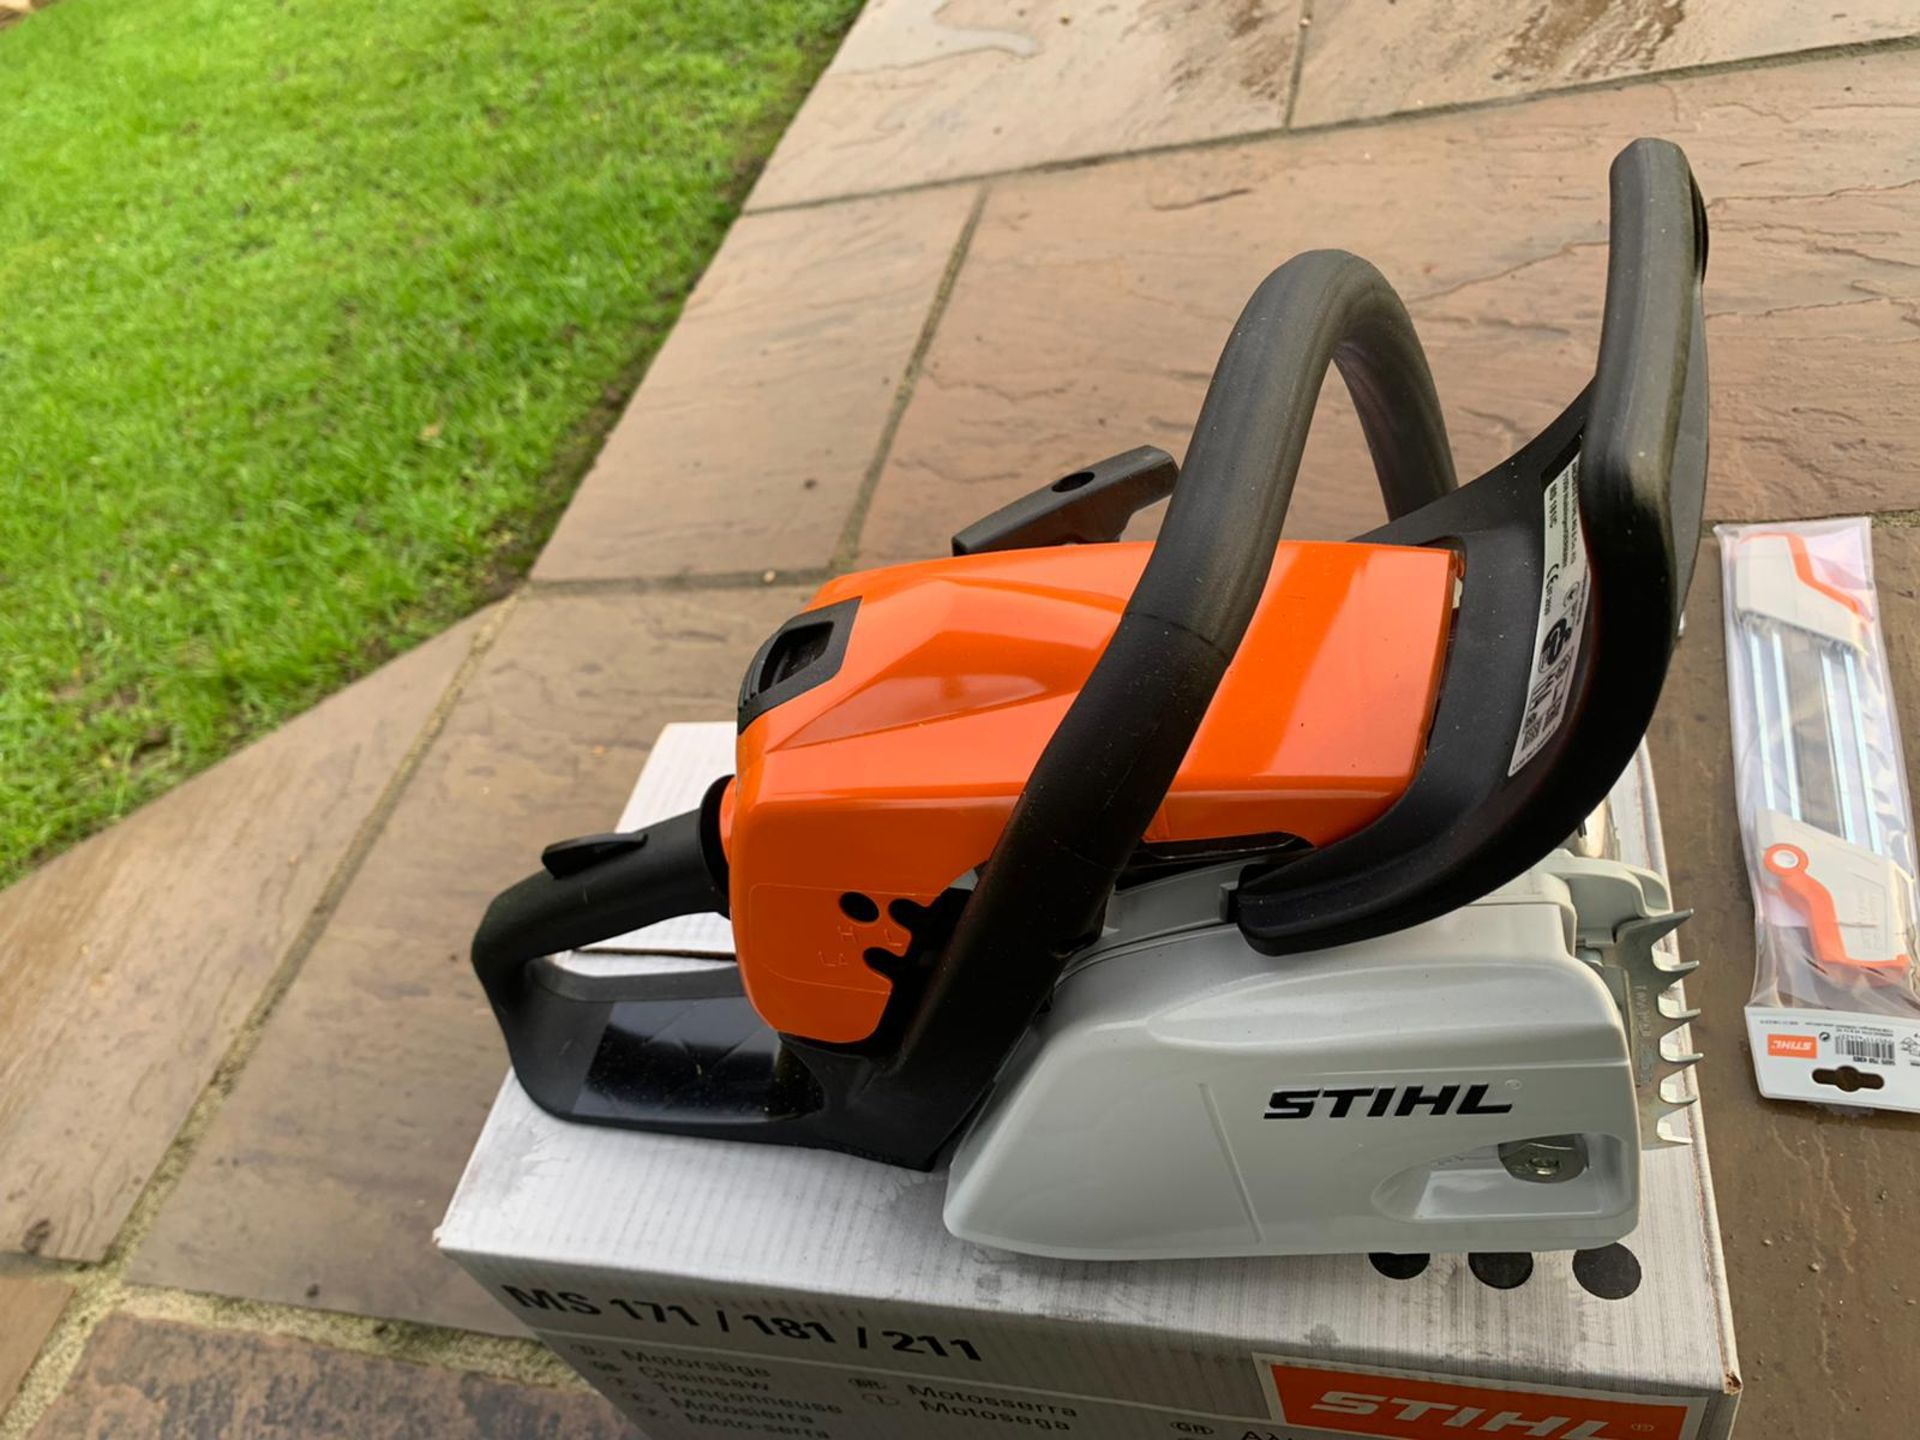 BRAND NEW & UNUSED STIHL MS181 CHAINSAW, C/W 14" BAR X2 CHAINS, MANUAL, TOOLS, 2IN1 FILE, BAR COVER - Image 4 of 6